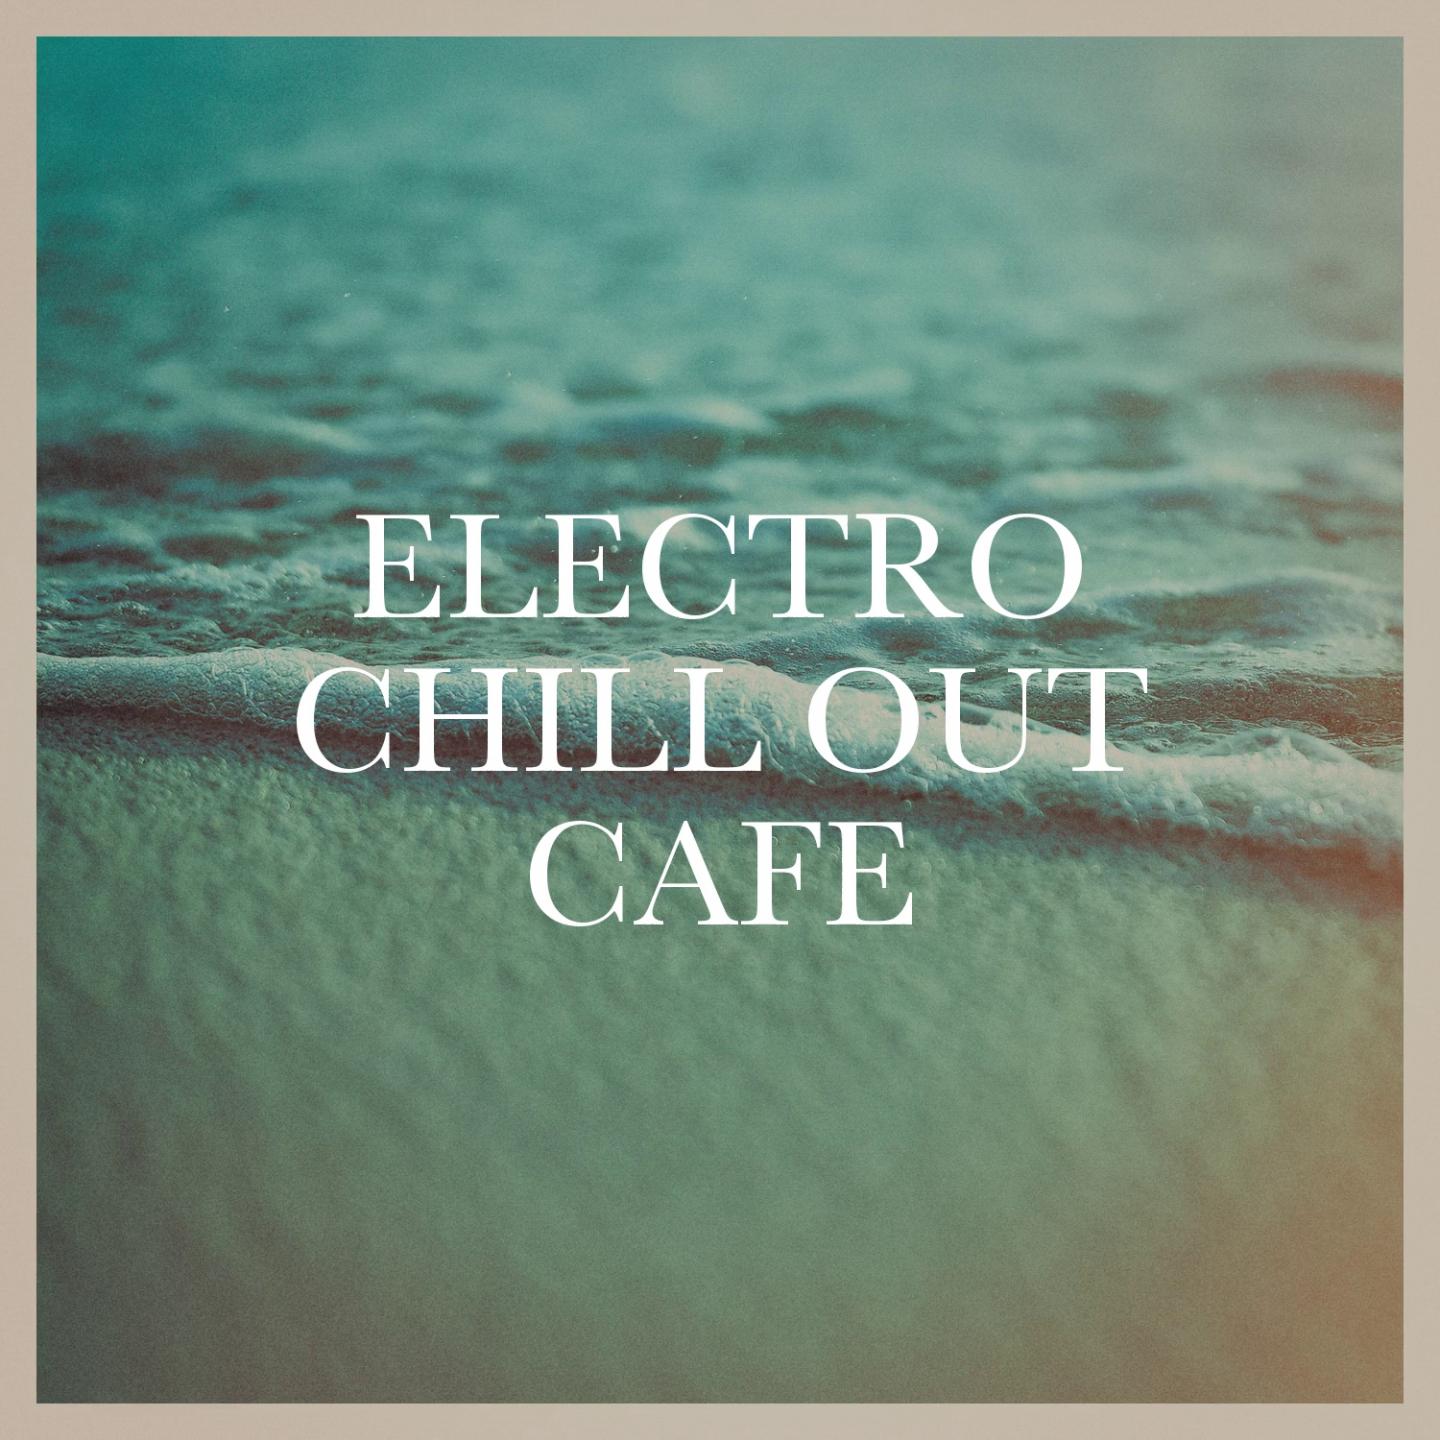 Electro Chill out Cafe